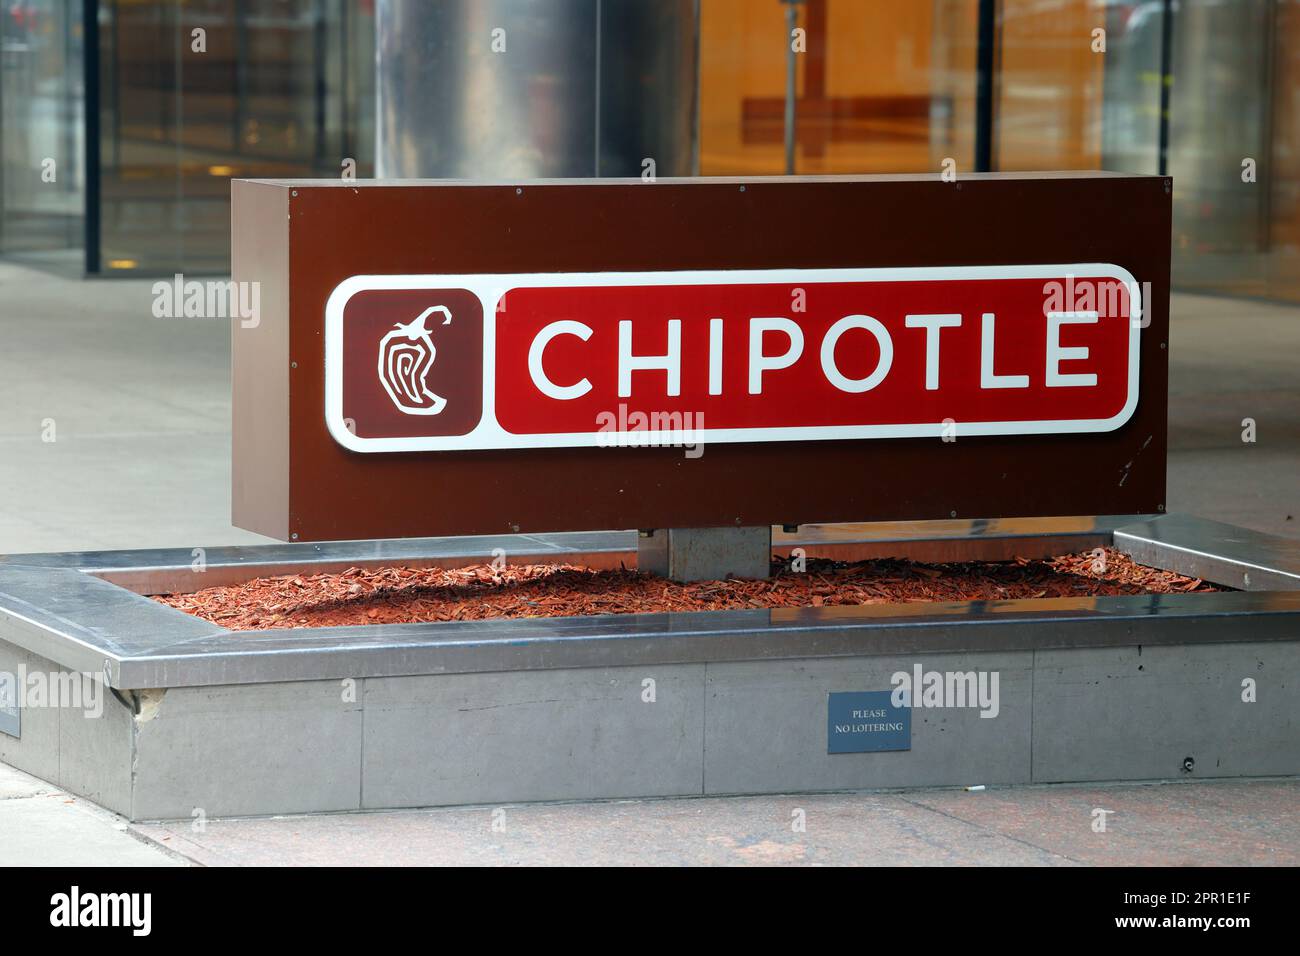 Signage for a Chipotle fast casual Mexican style restaurant. Stock Photo